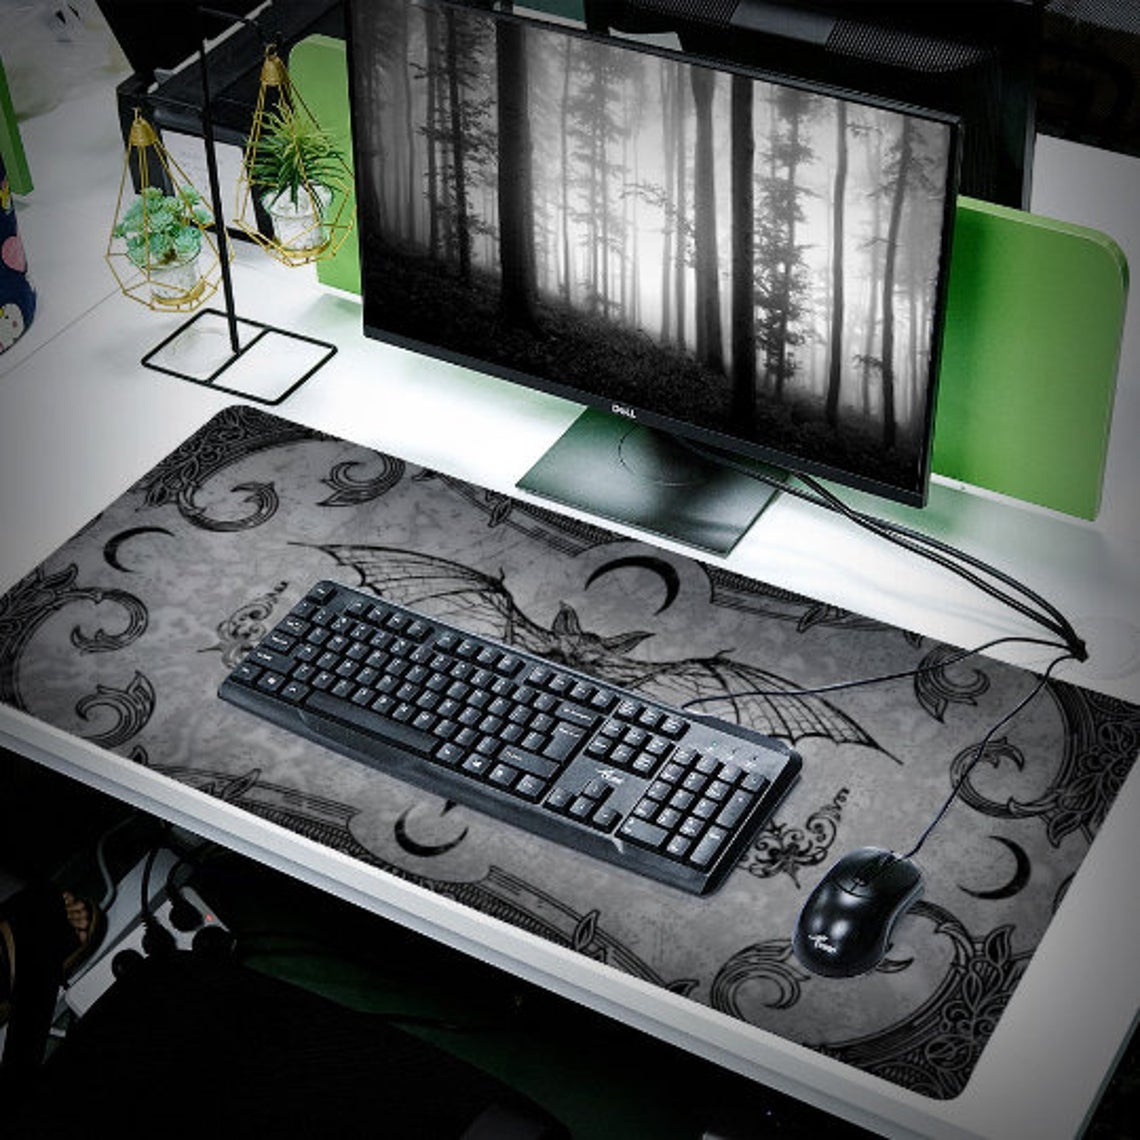 Characters Mouse Pads & Desk Mats for Sale